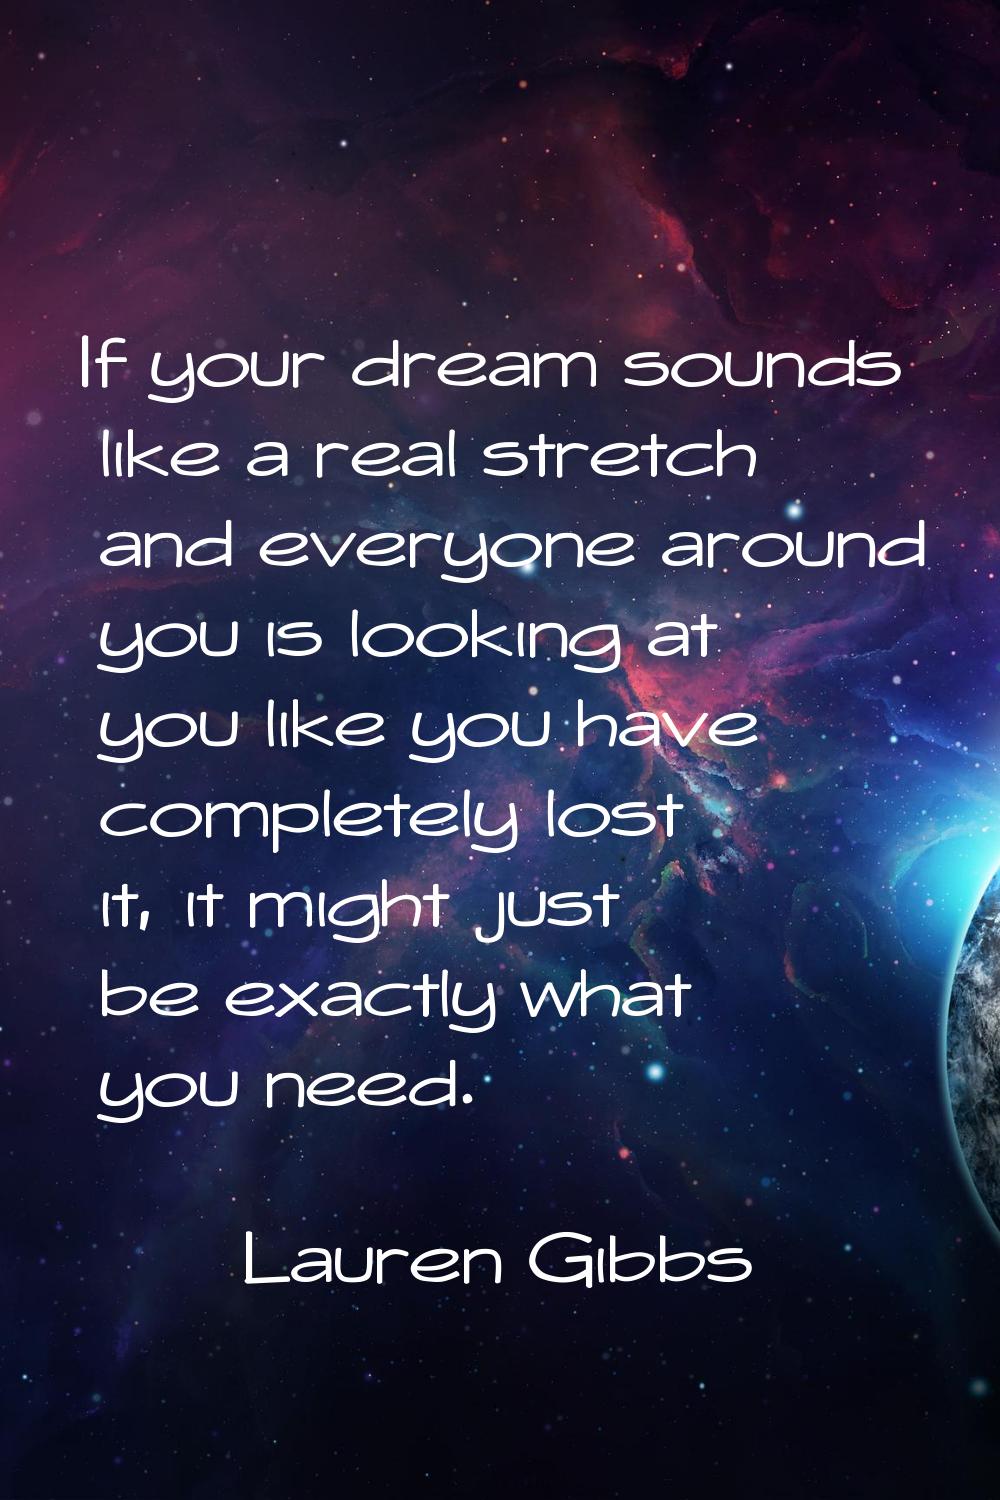 If your dream sounds like a real stretch and everyone around you is looking at you like you have co